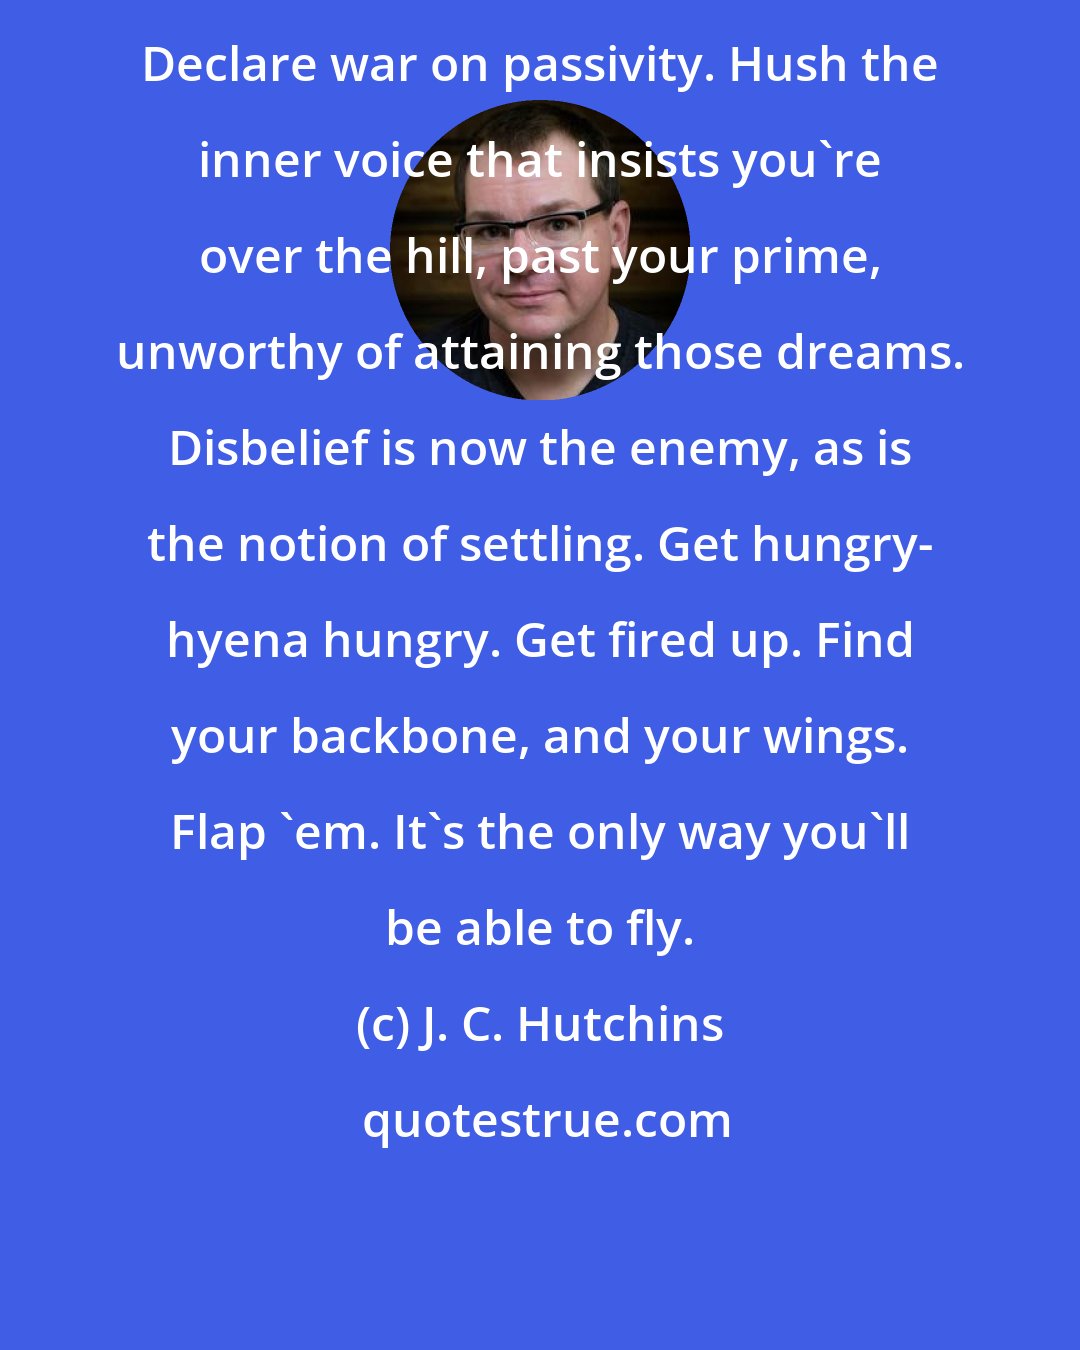 J. C. Hutchins: Declare war on passivity. Hush the inner voice that insists you're over the hill, past your prime, unworthy of attaining those dreams. Disbelief is now the enemy, as is the notion of settling. Get hungry- hyena hungry. Get fired up. Find your backbone, and your wings. Flap 'em. It's the only way you'll be able to fly.